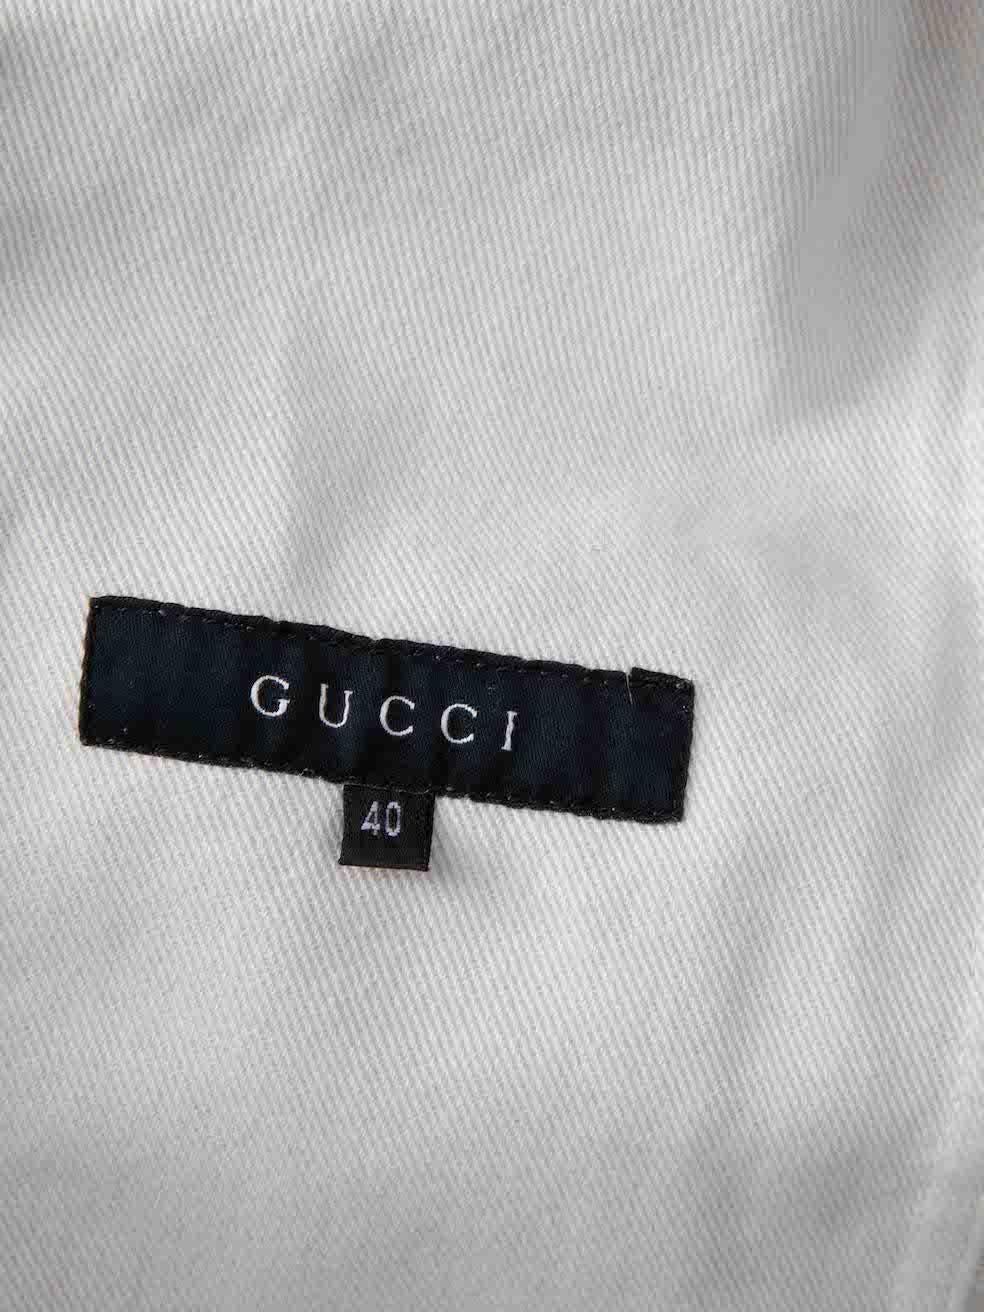 Gucci Stone Denim Two-Piece Fur Lined Jacket Size S For Sale 1